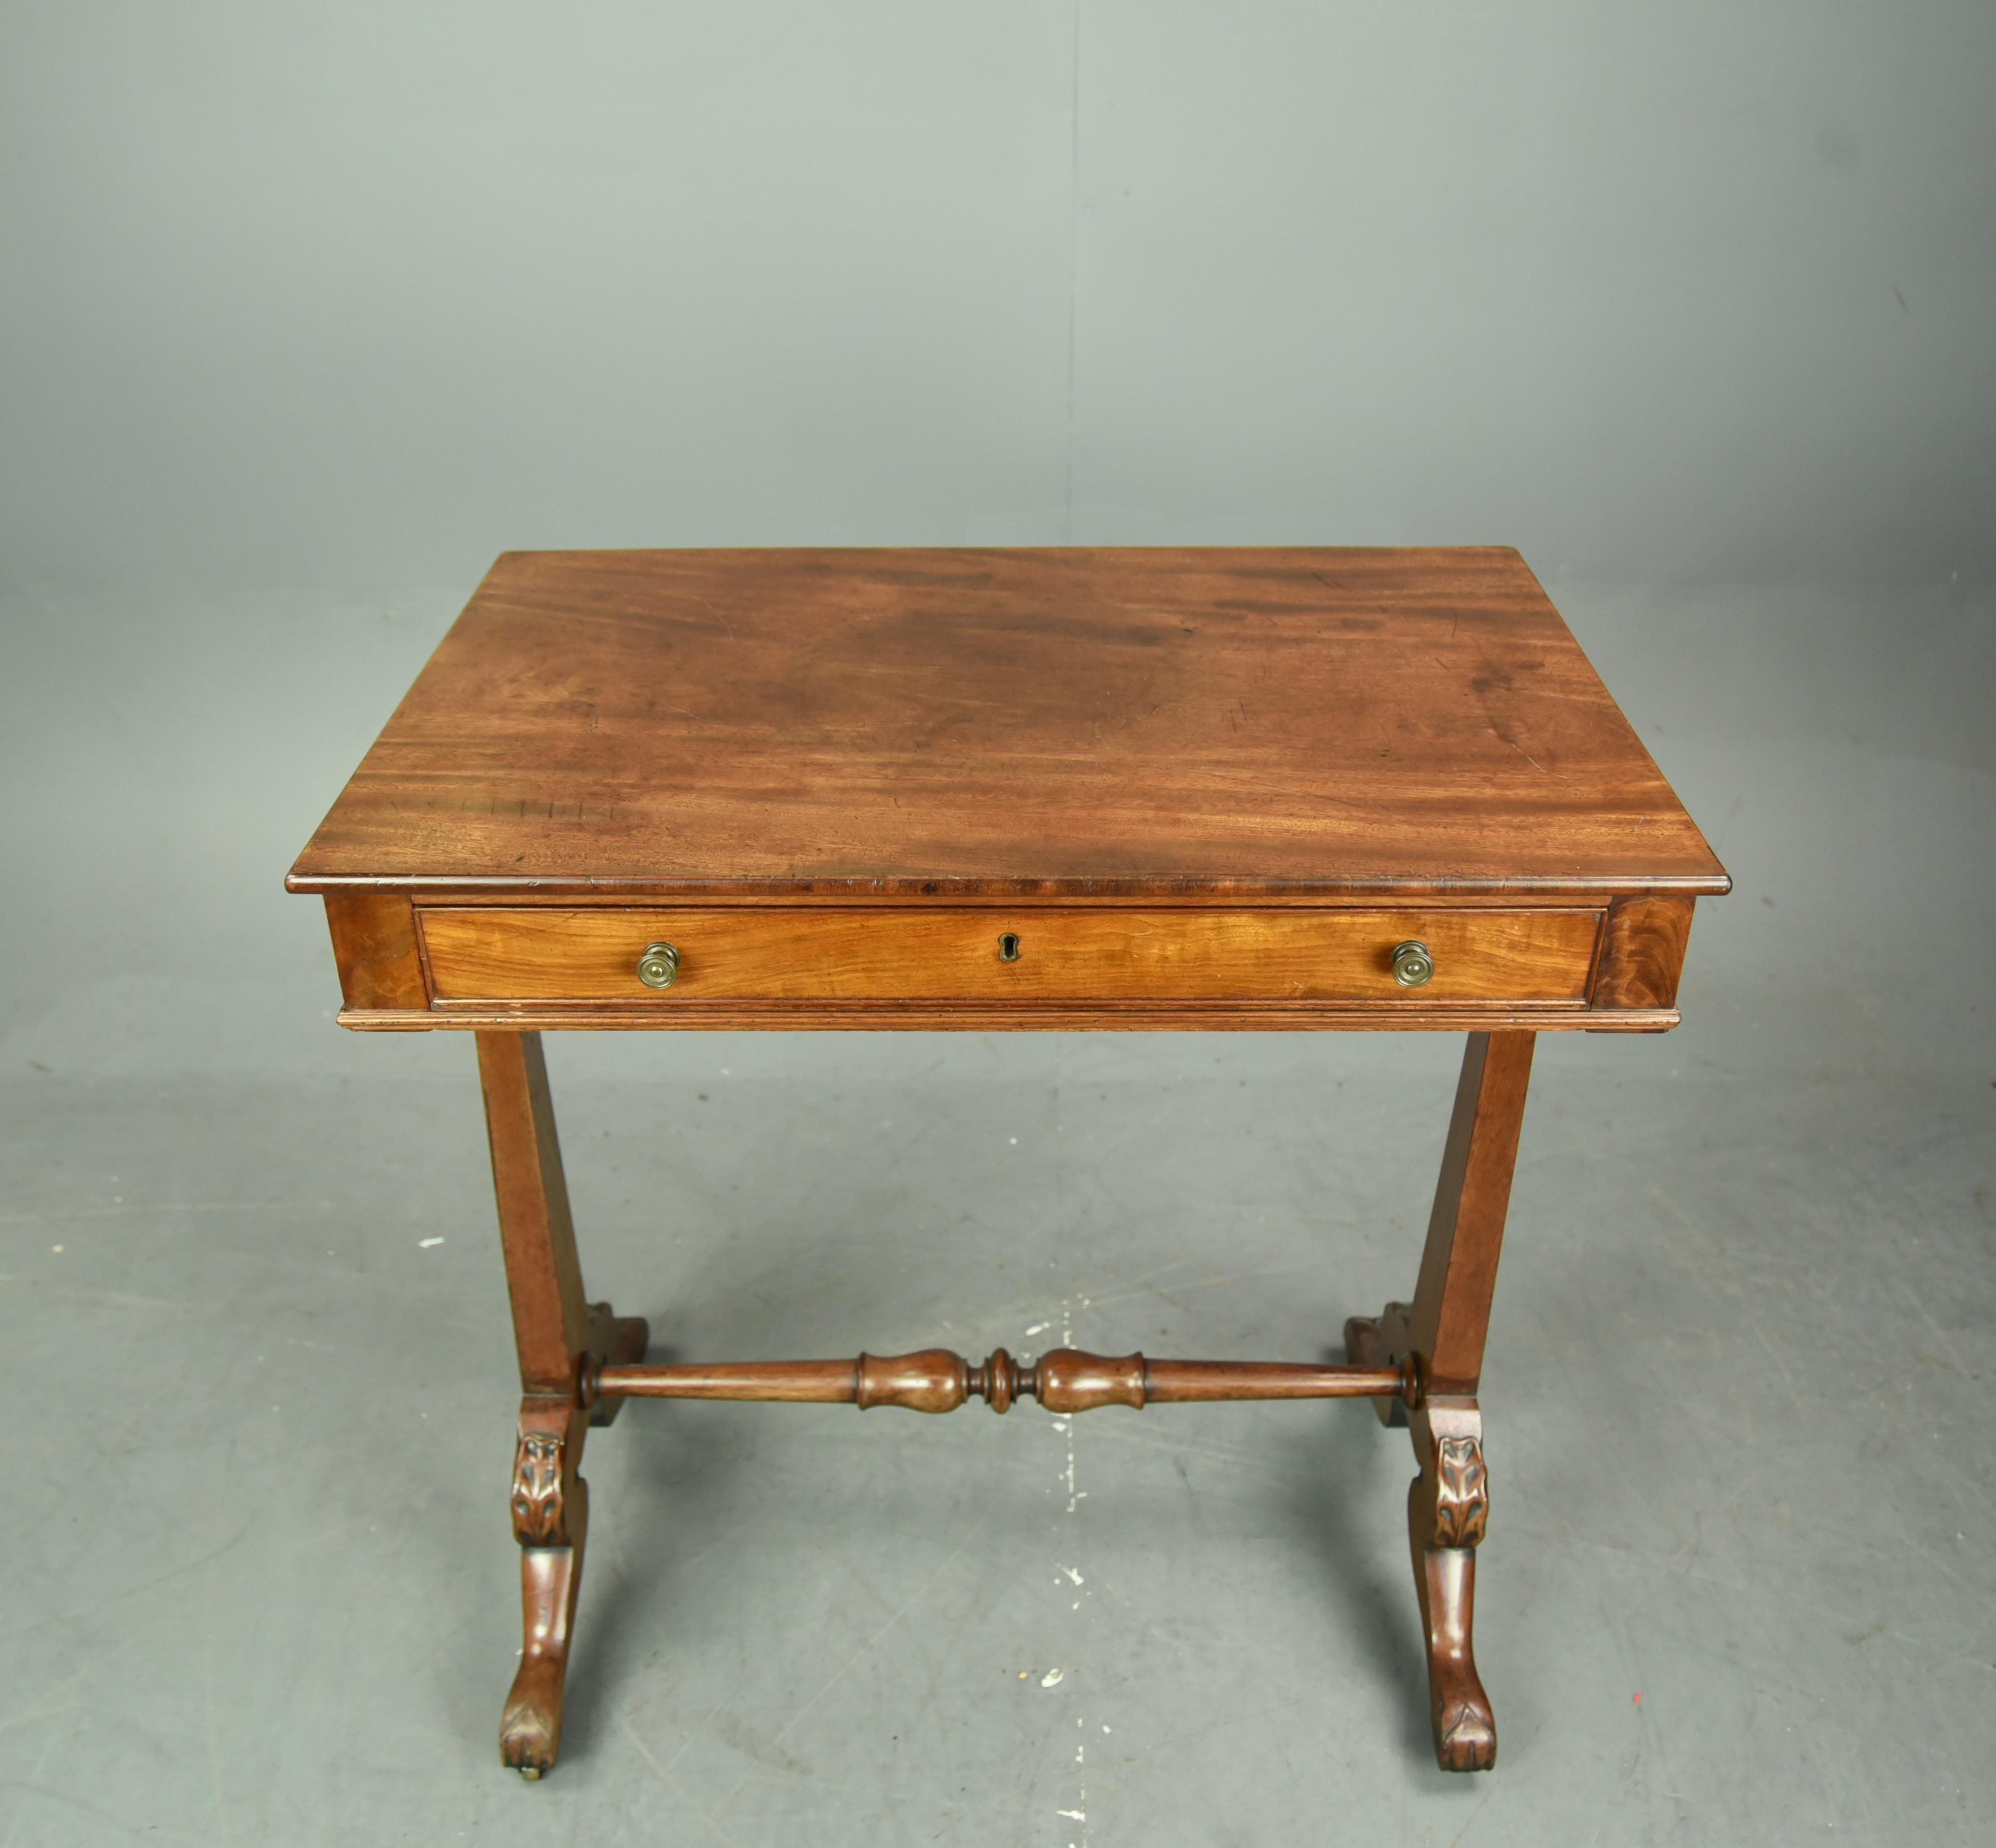 Wonderful Quality Small regency side table with a single drawer.
Great practical side table /lamp table standing on trestle ends with a turned stretcher. Finished all round so can be free standing.
The table is in great condition has a good color